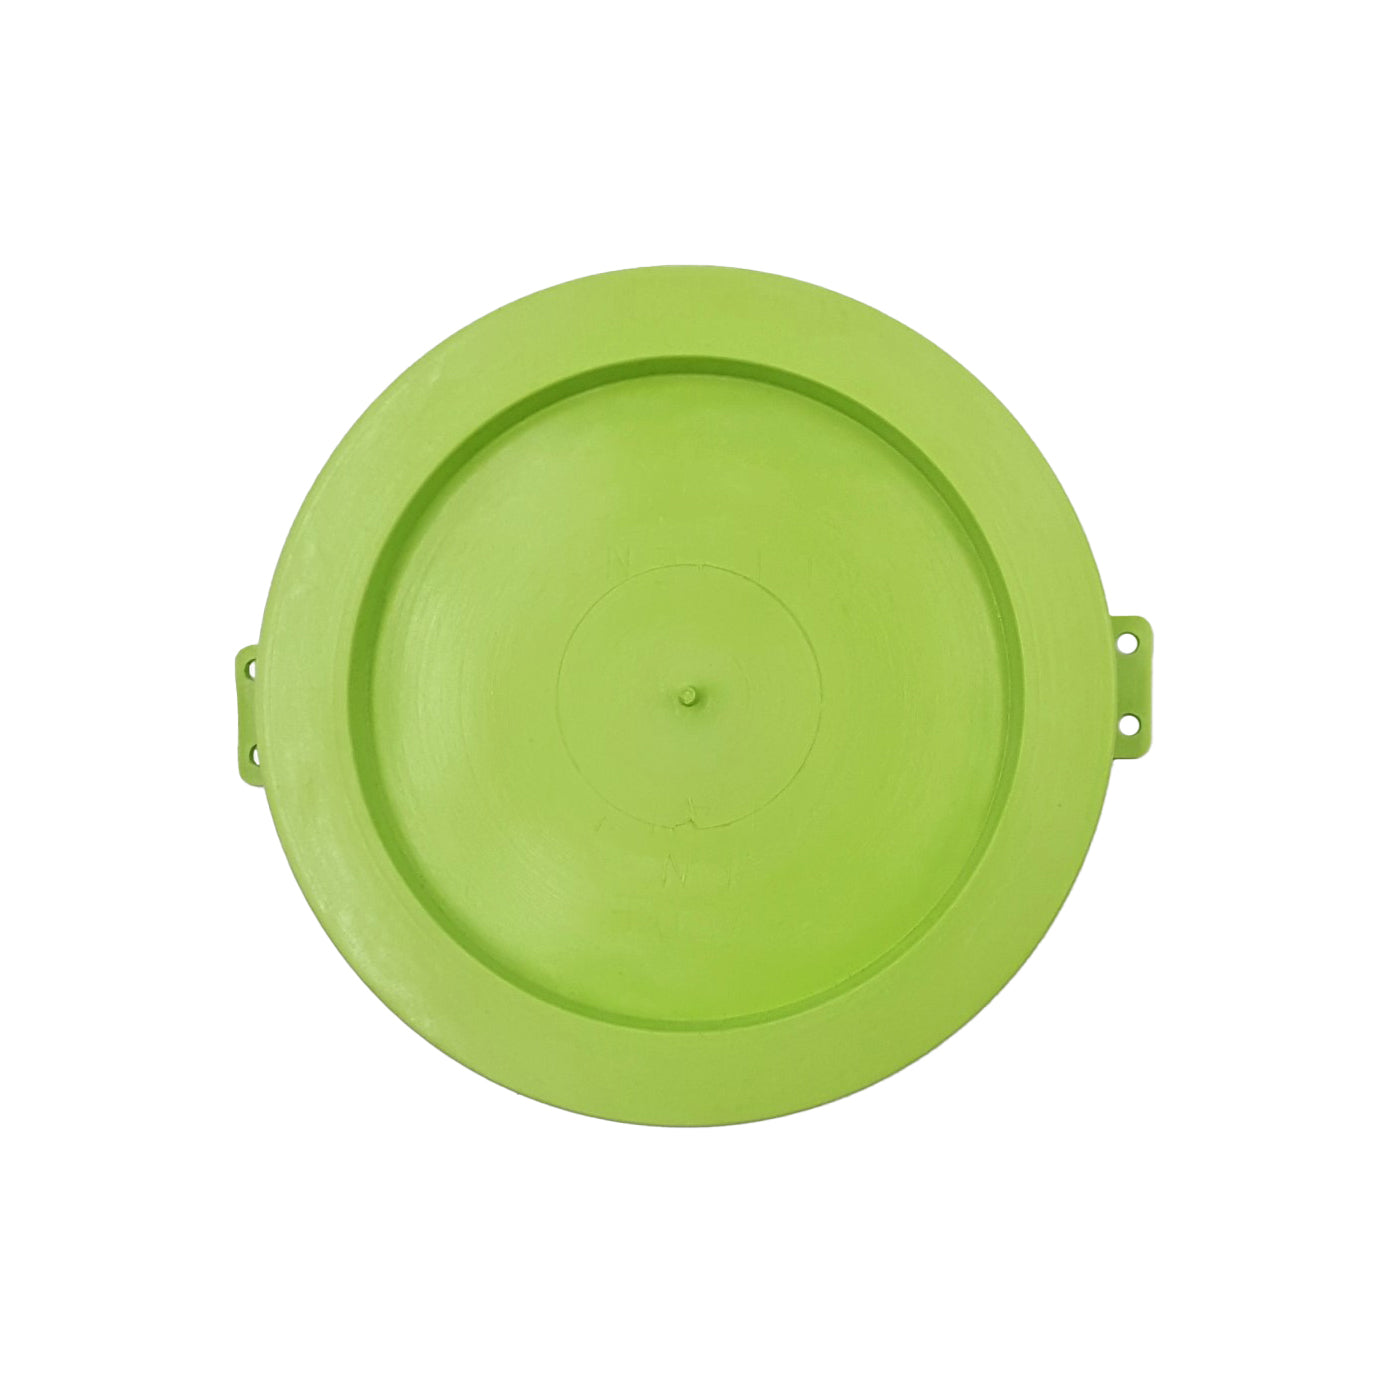 green plastic lid to suit all wide neck demijohns